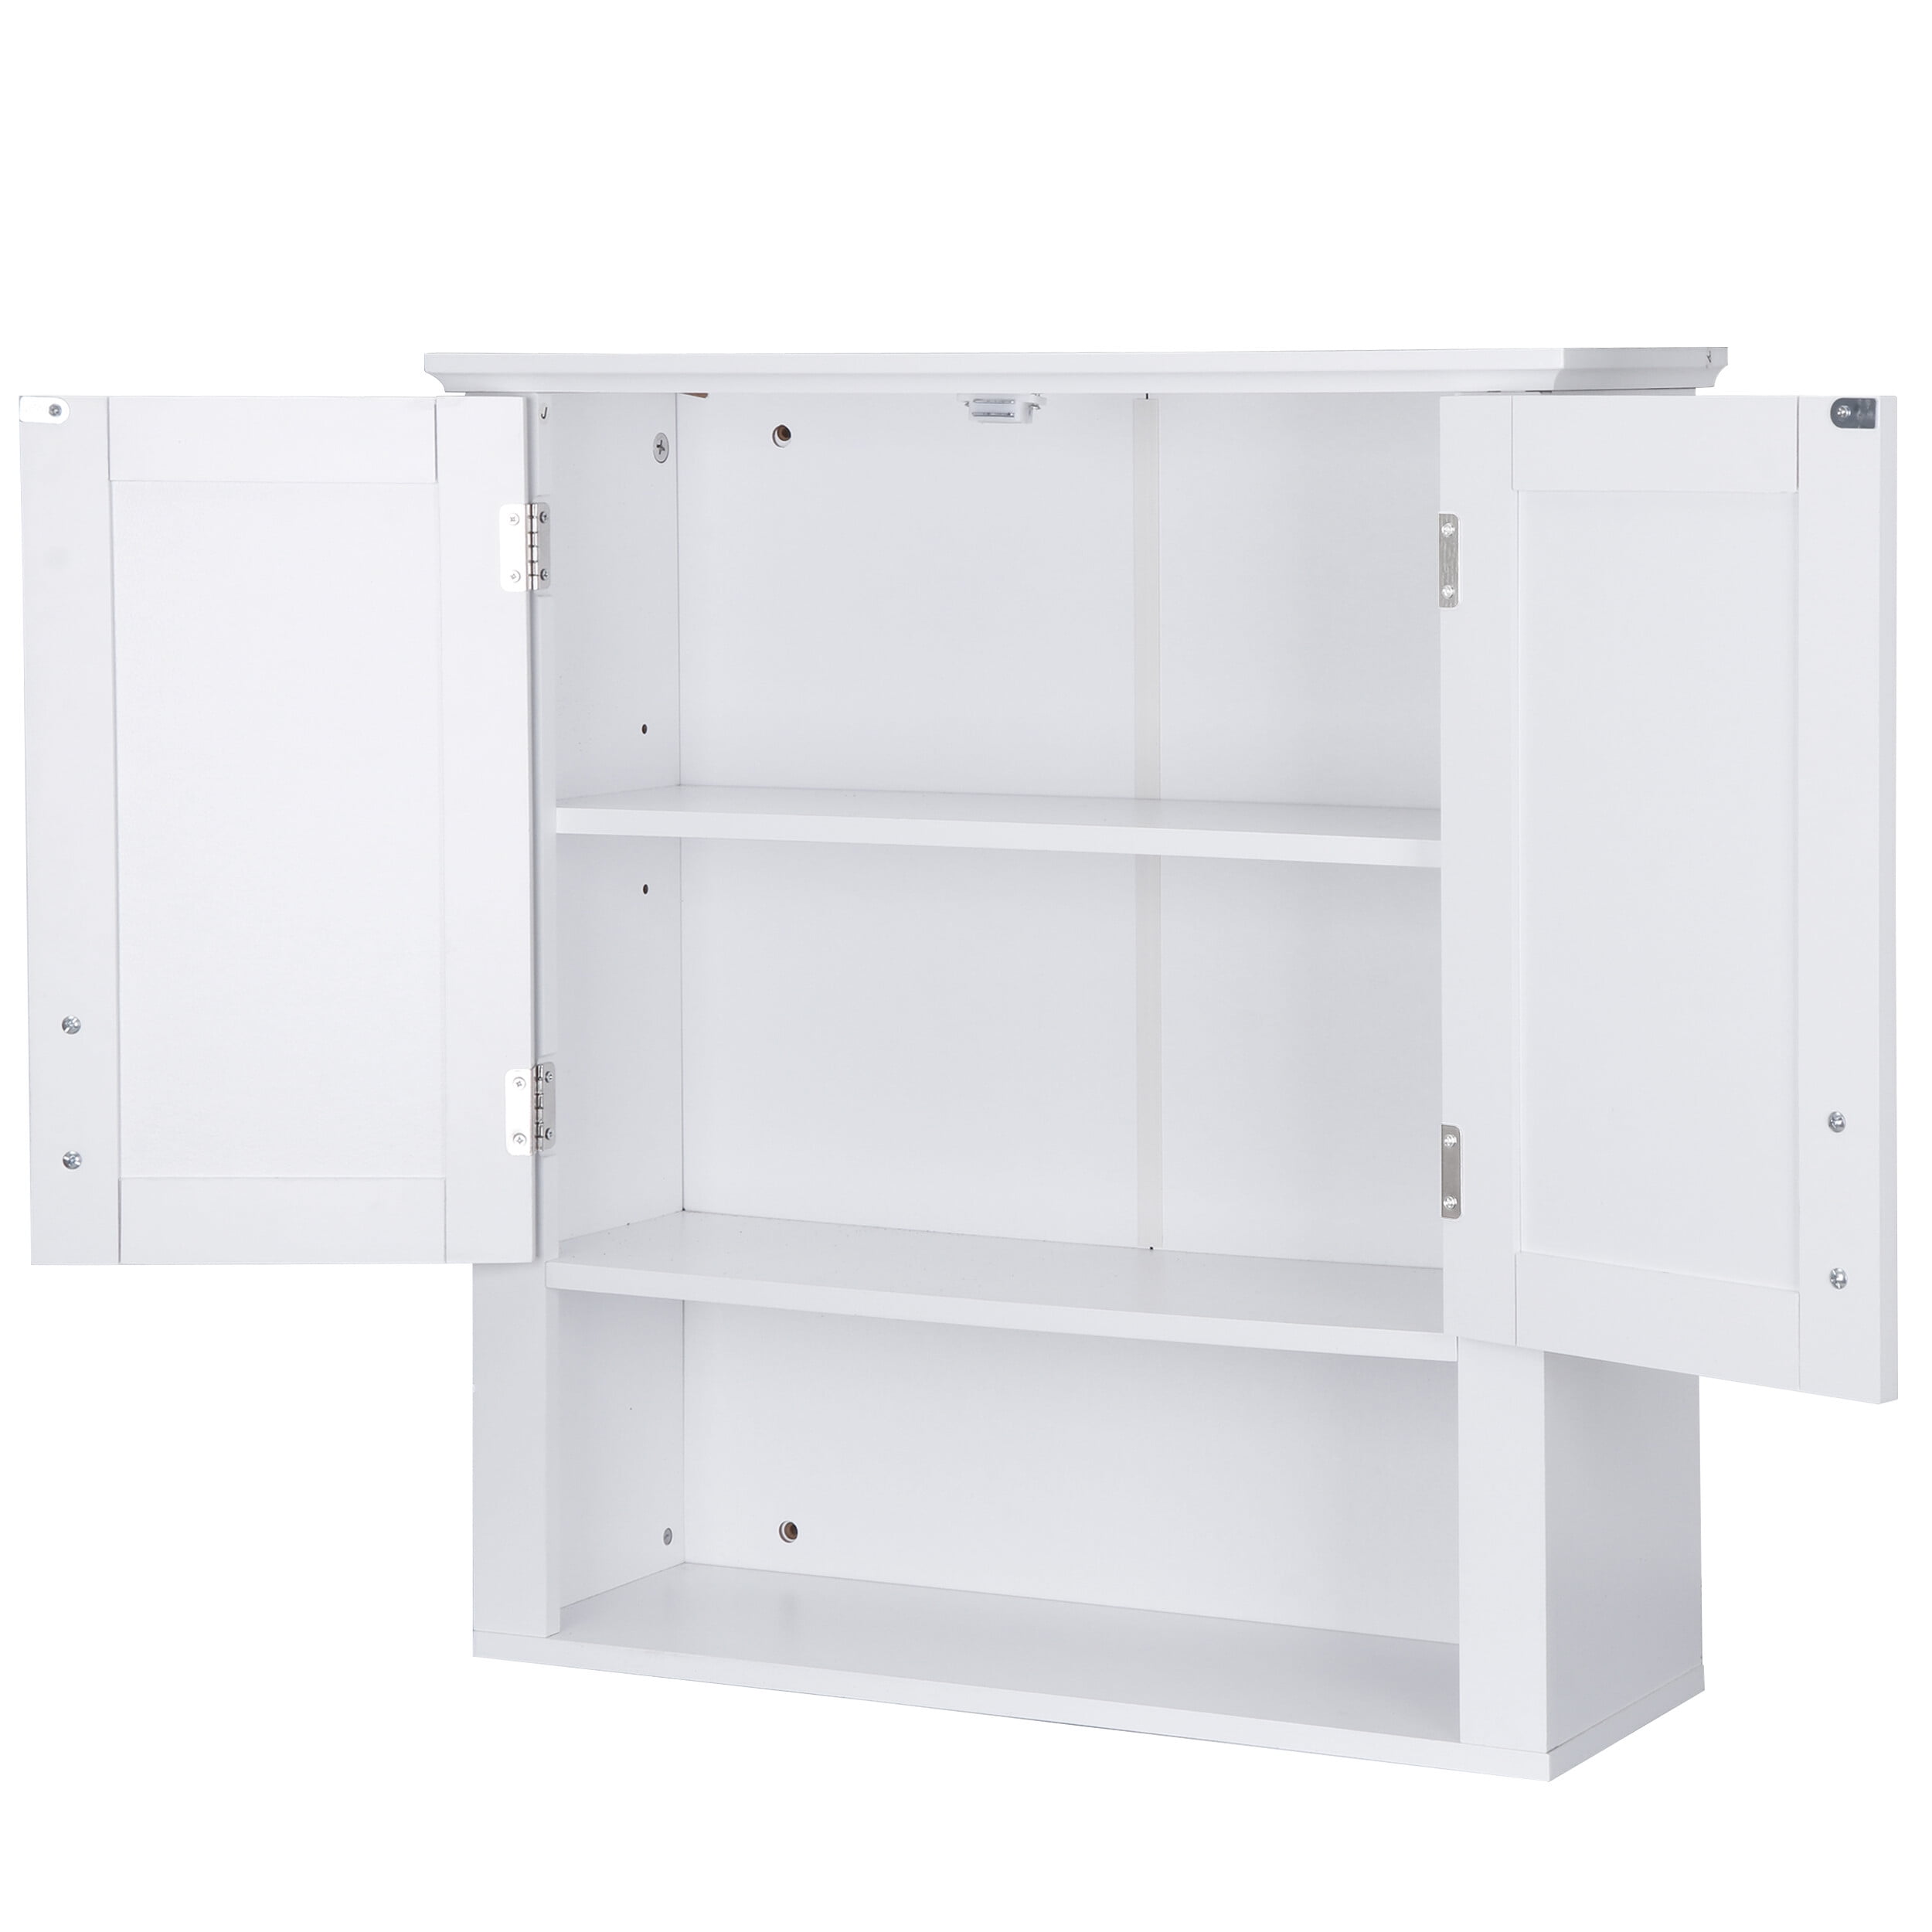 Basicwise QI004608.WT Wall Mount Bathroom Cabinet Wooden Medicine Cabinet Storage Organizer Double Door with 2 Shelves, and Open Display Shelf, White